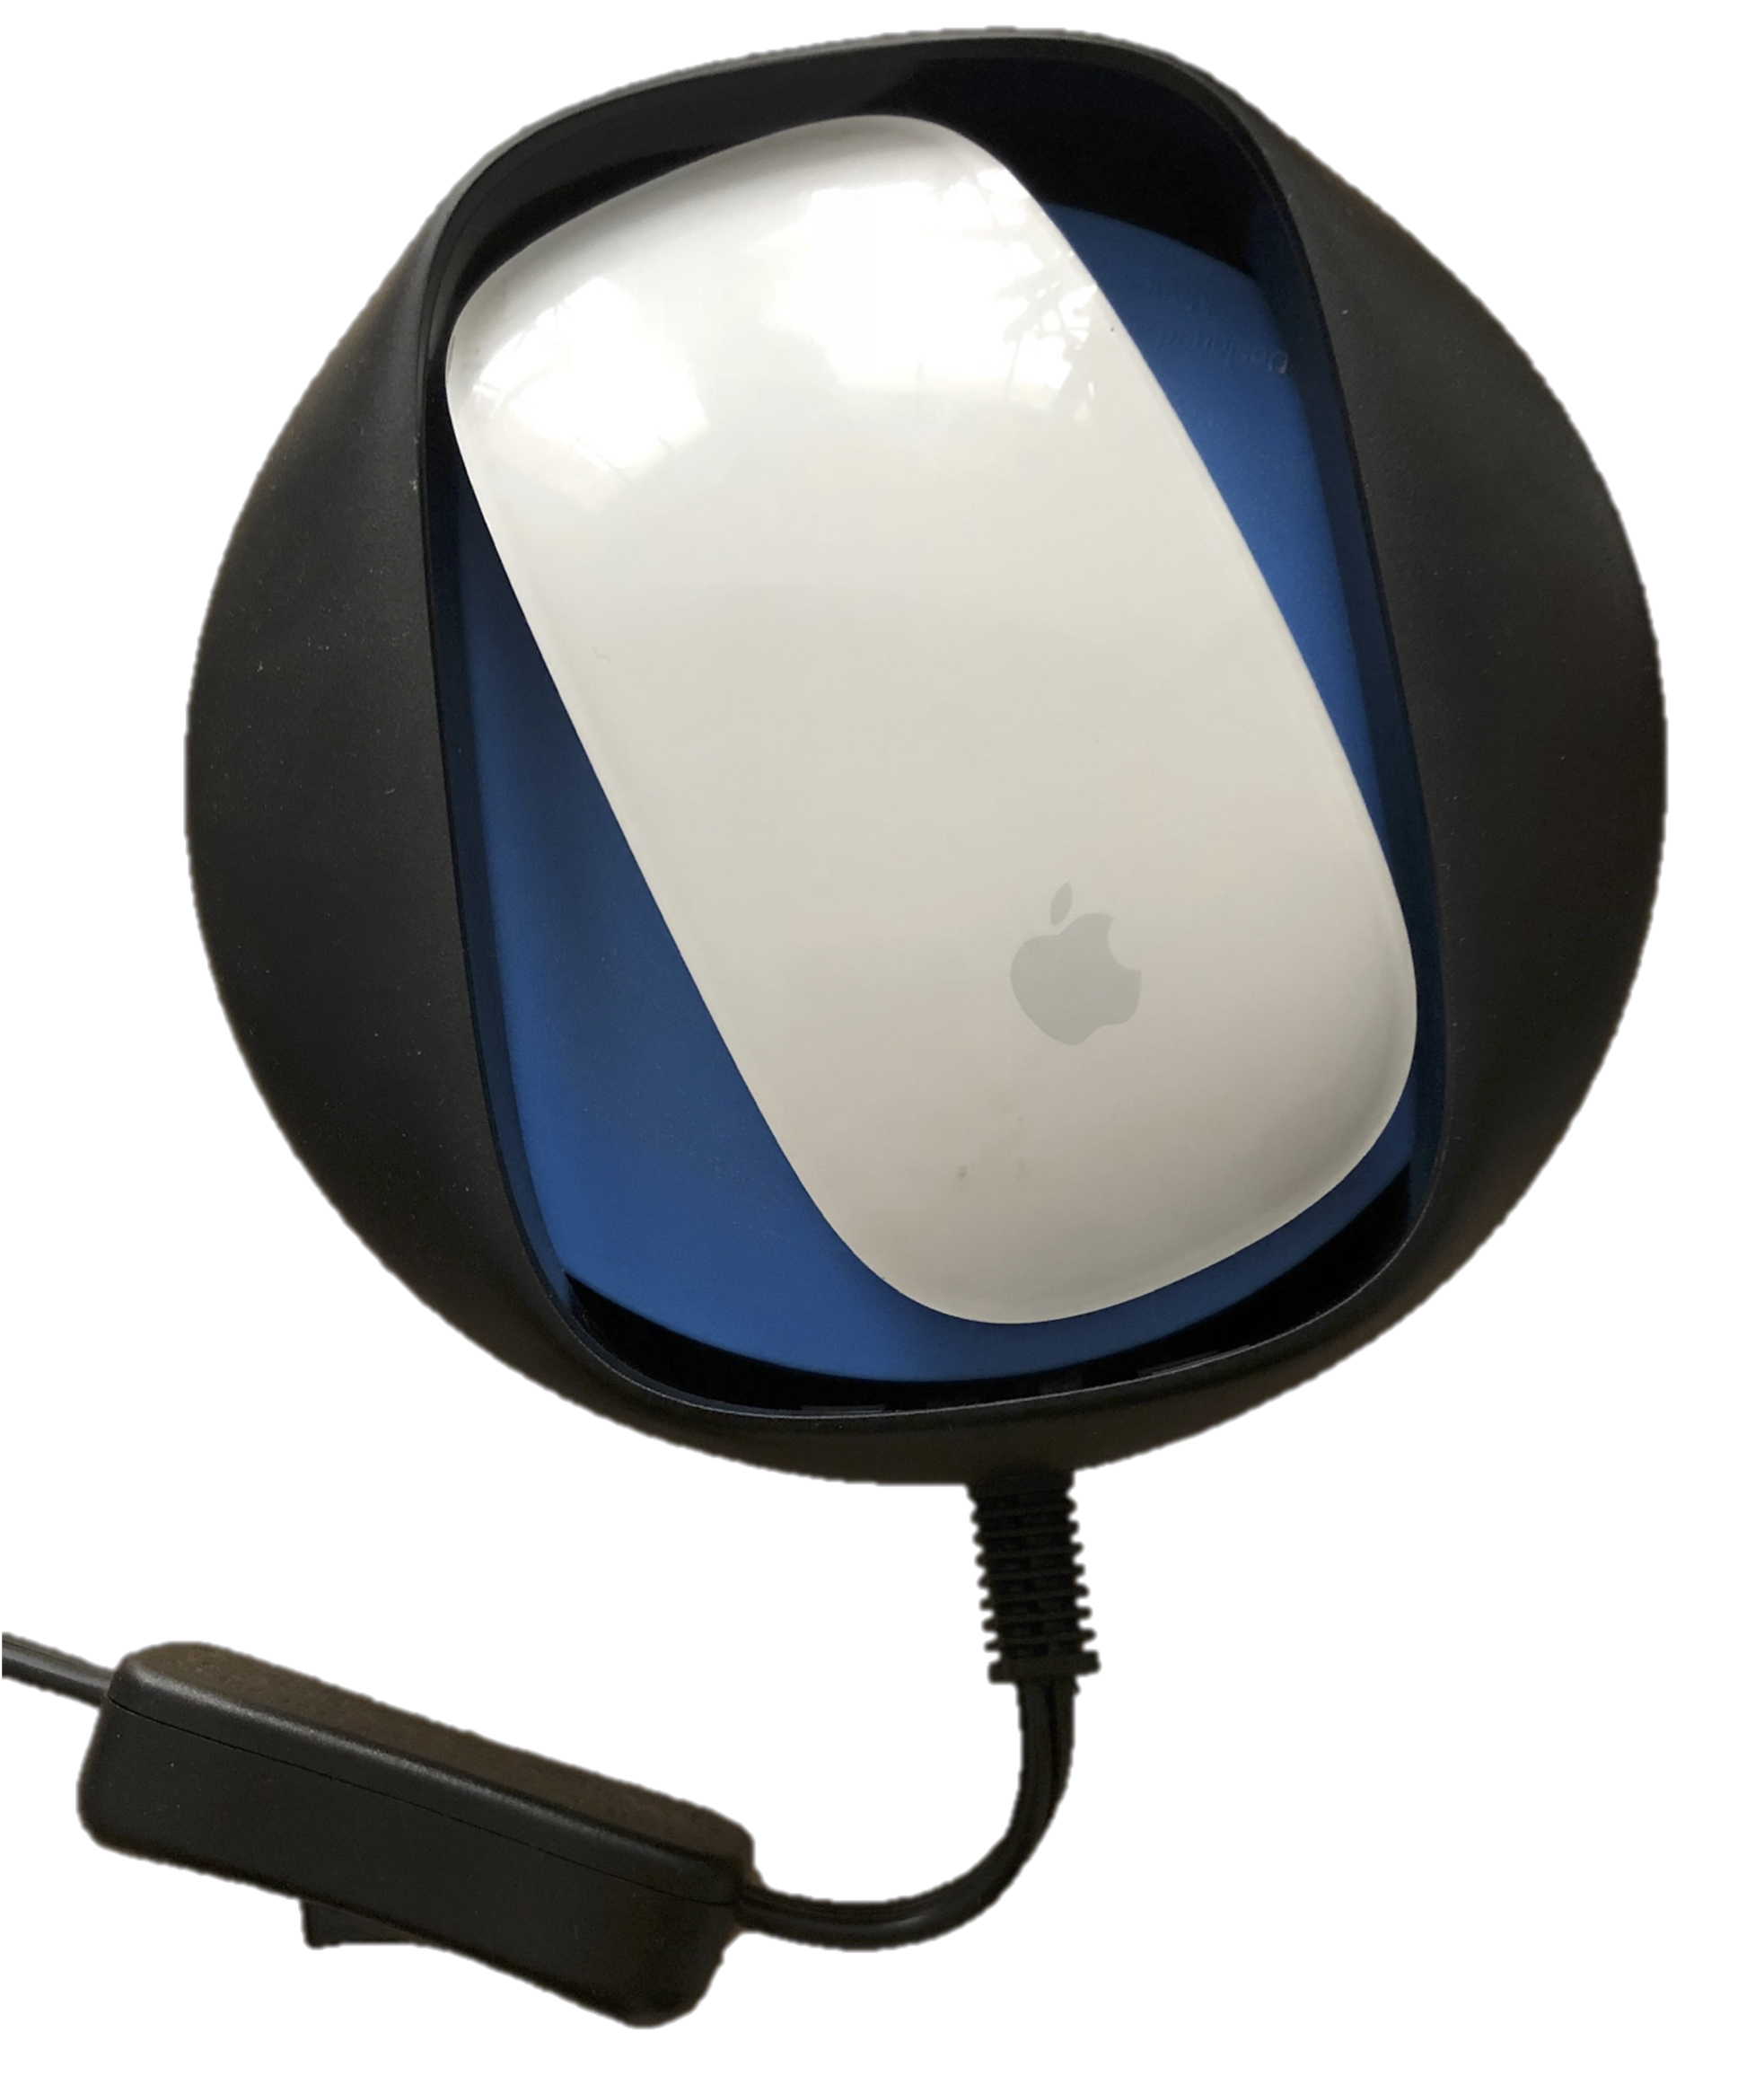 F2 apple mouse